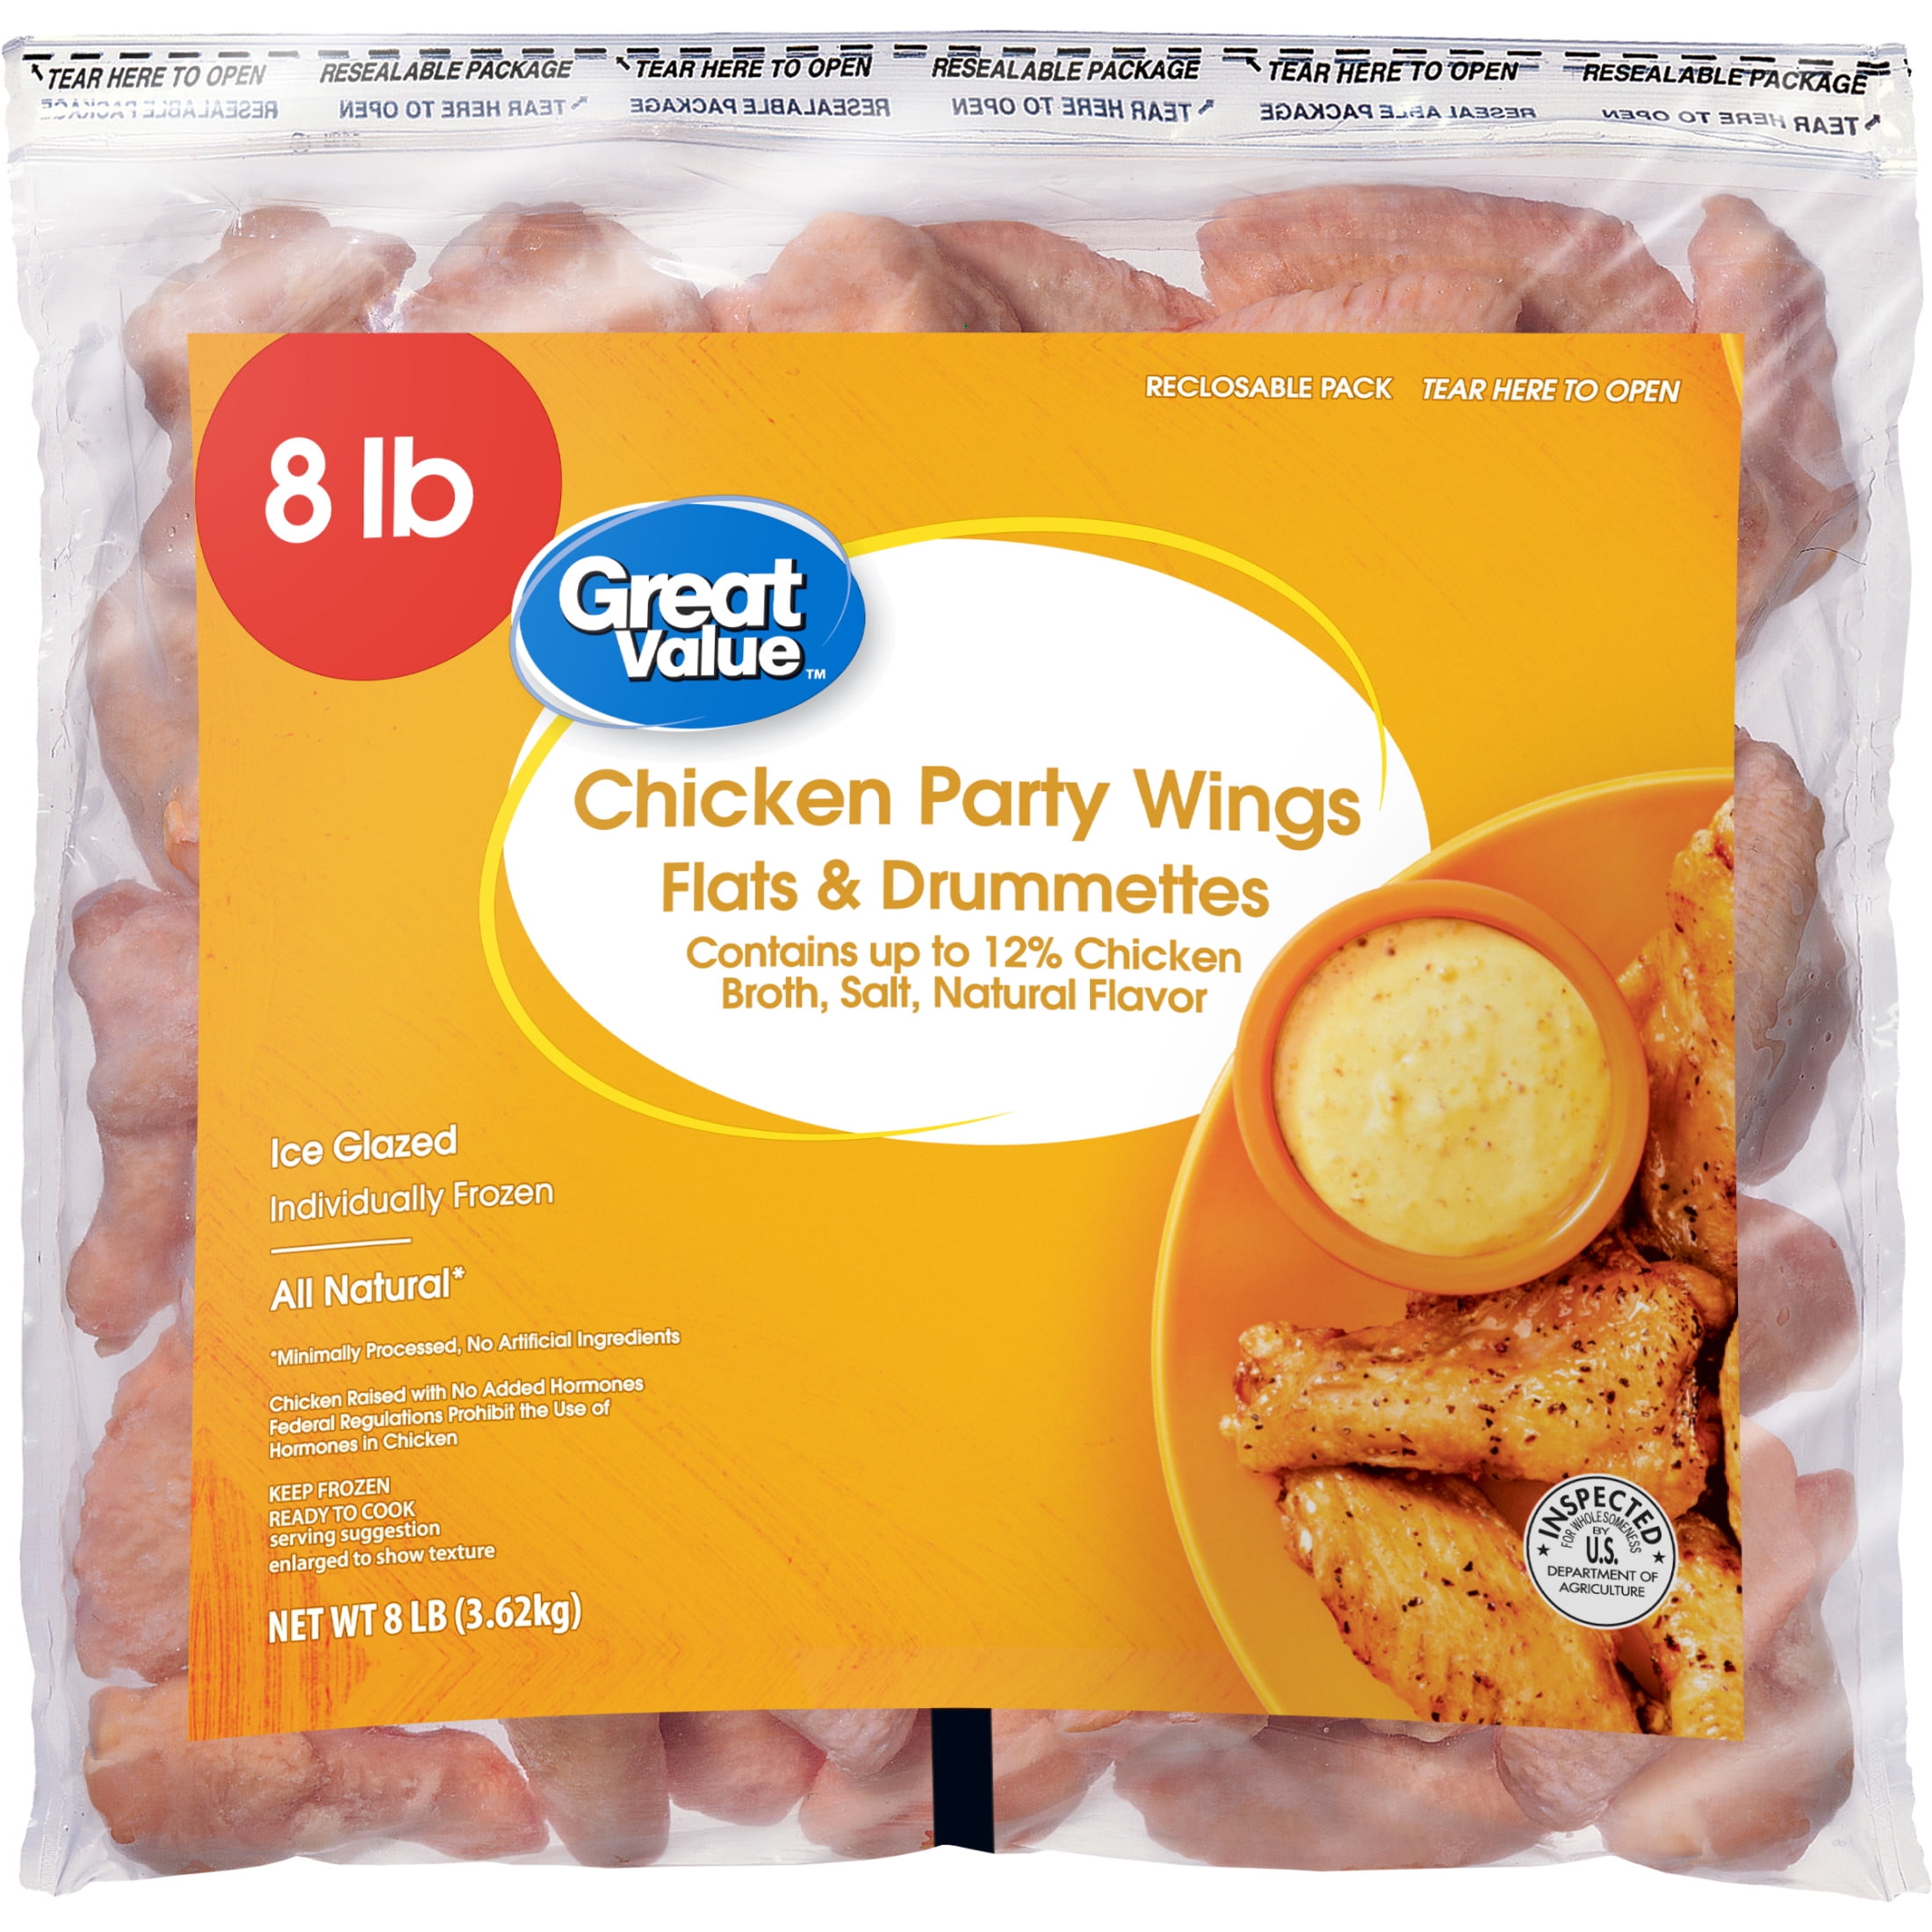 Great Value All Natural Chicken Wing Sections 8 lb Frozen 4533c5c0 5a53 43f1 8c20 46ed73de428f.adf91340ce012610384780624a8b09b9